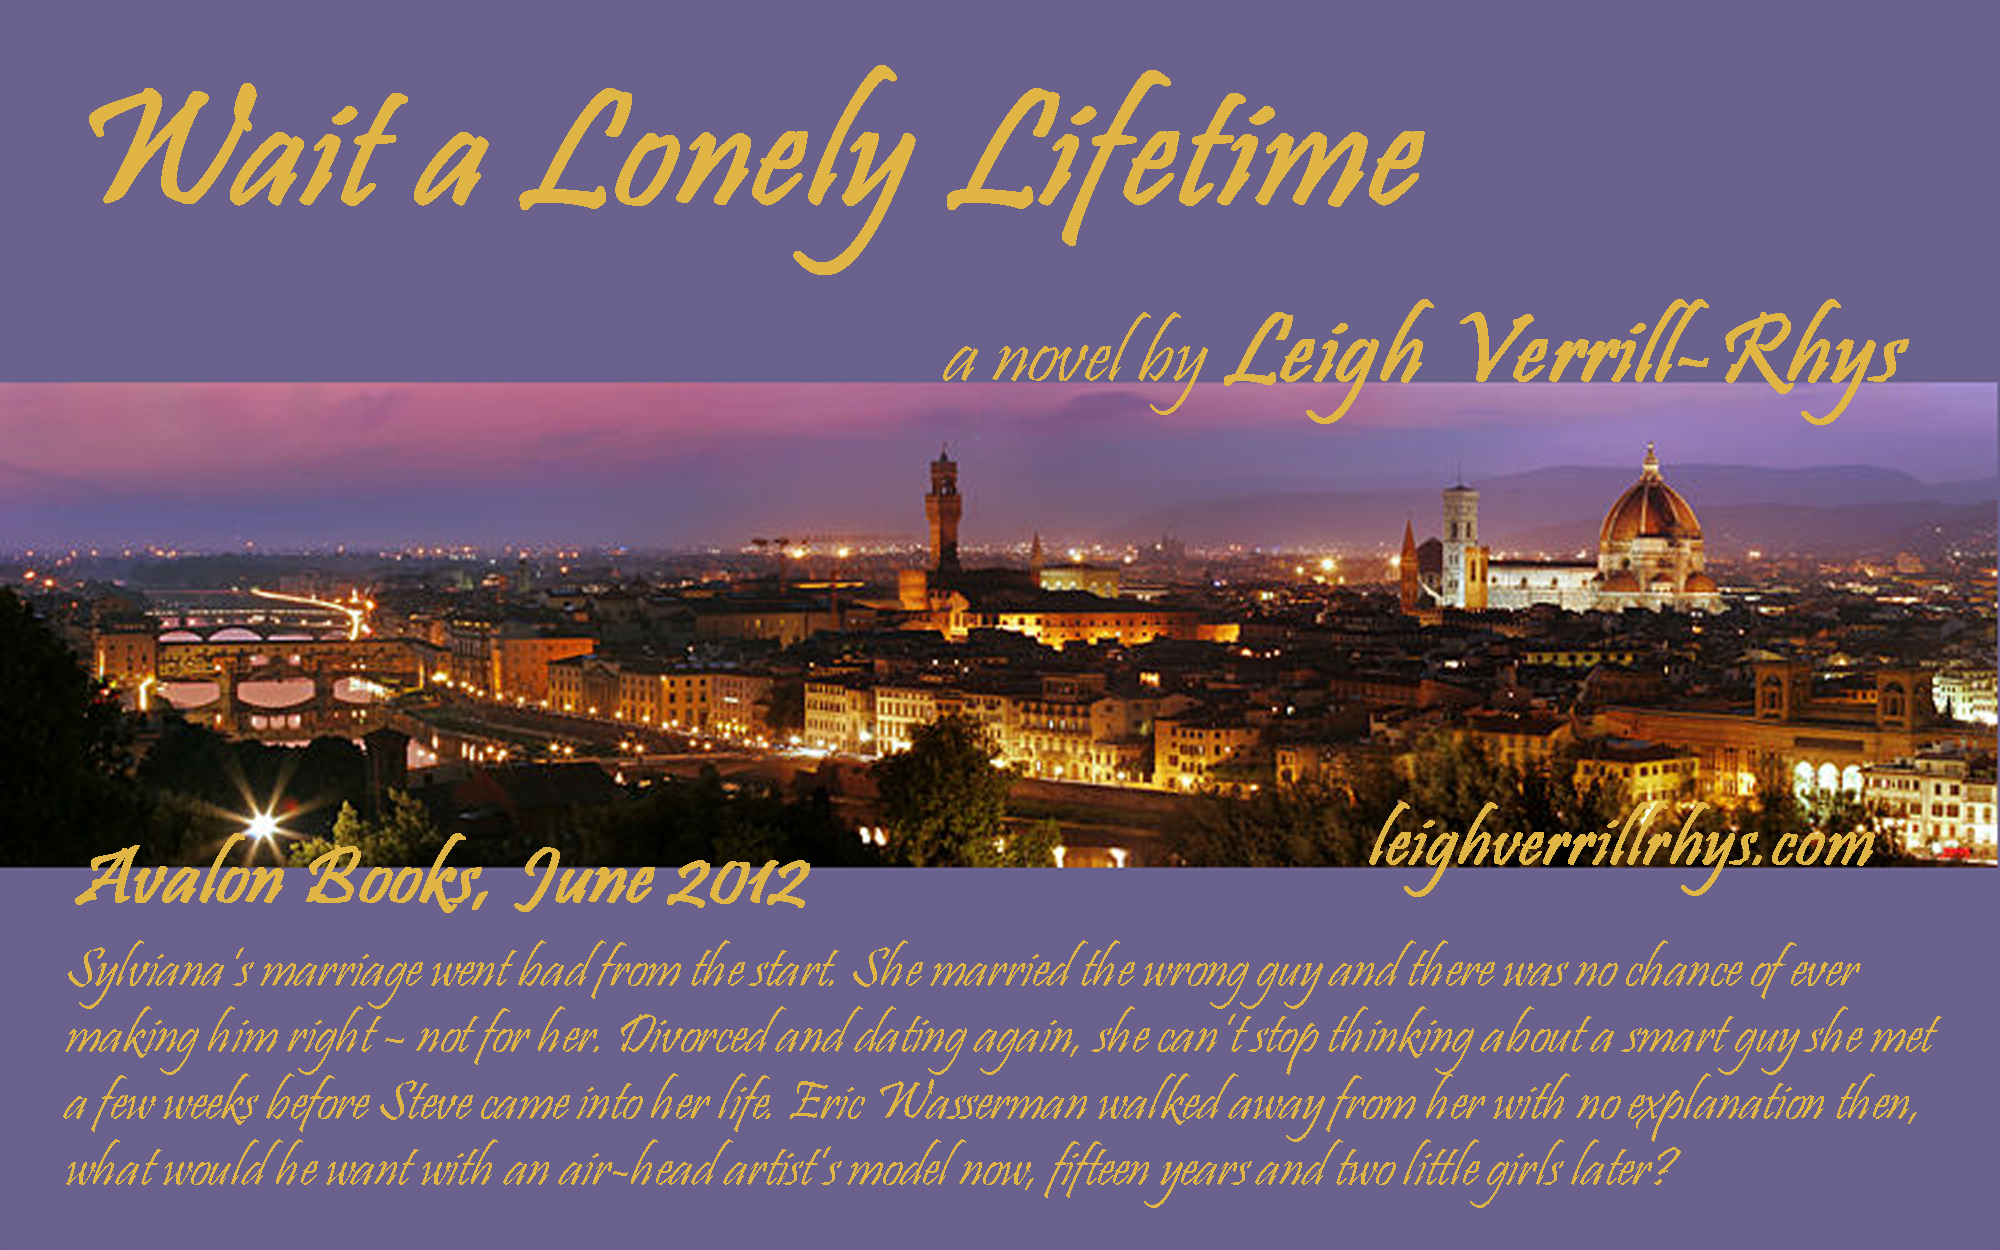 Promotional Material for Wait a Lonely Lifetime